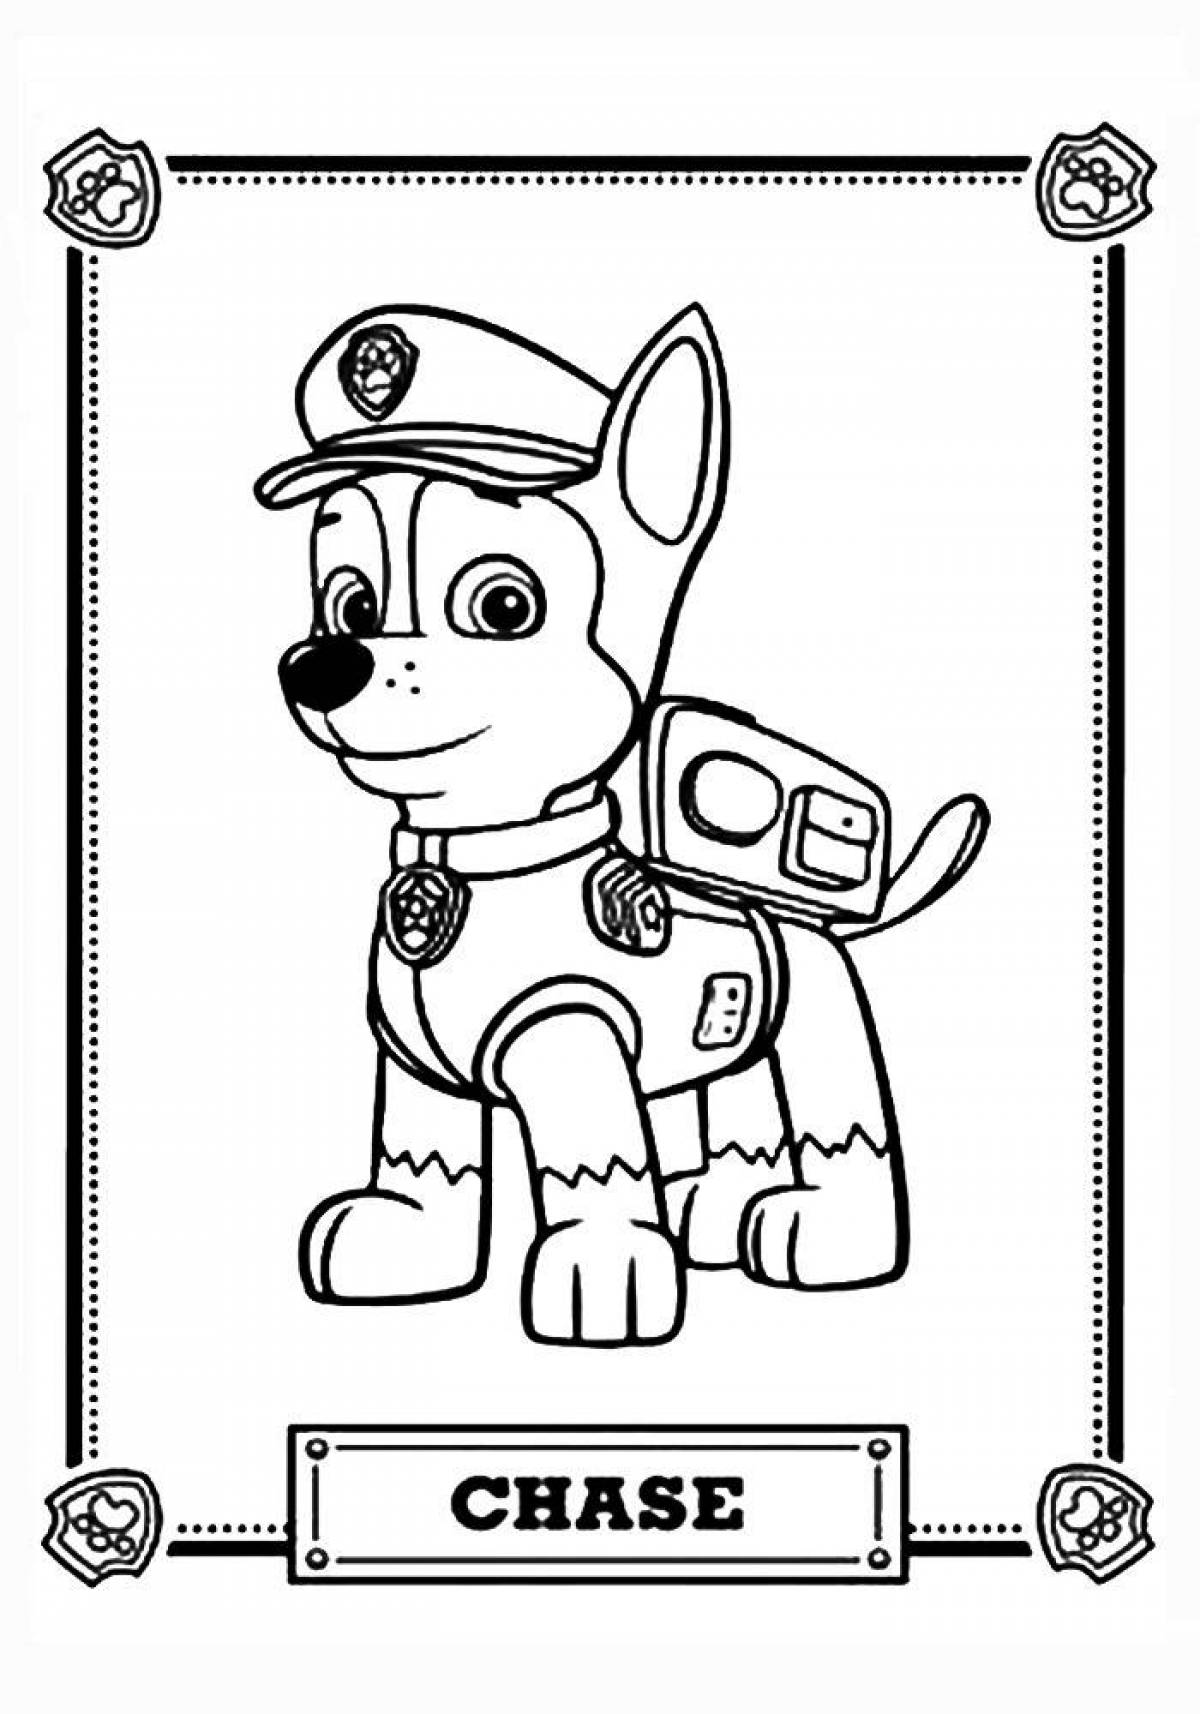 Paw patrol racer coloring page